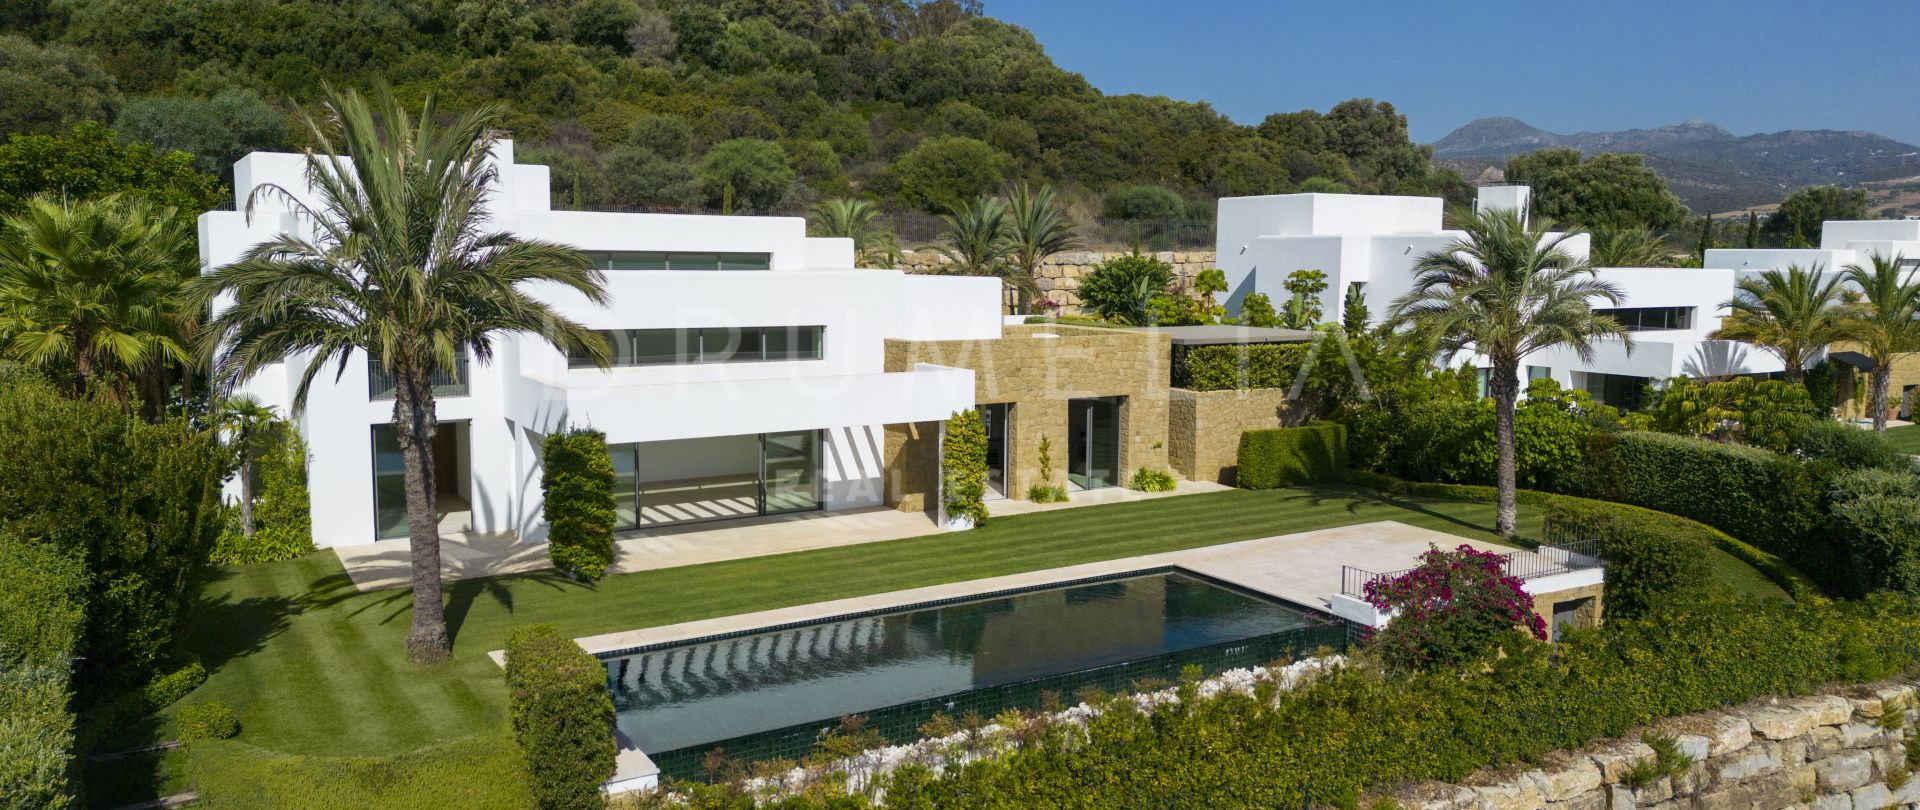 Brand-new frontline golf luxury villa with superb views and Ibiza-style charm, Finca Cortesin, Casares.